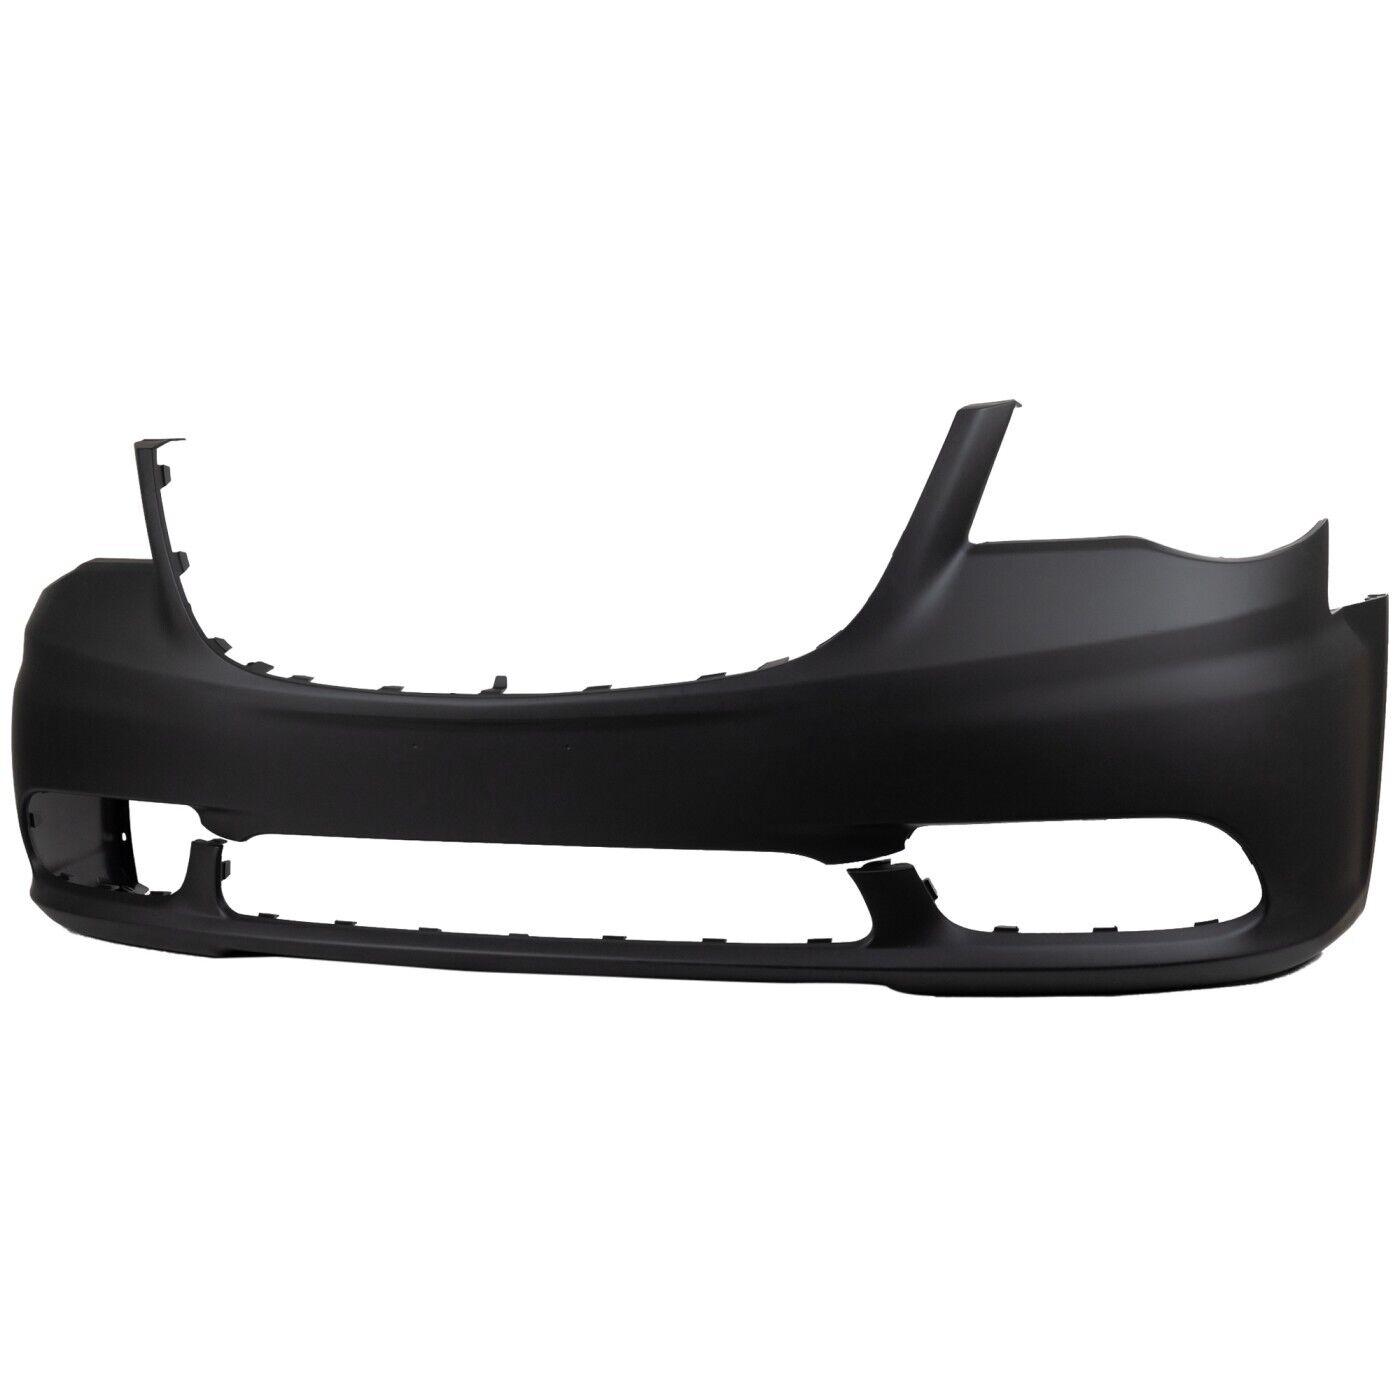 Front Bumper Cover For 2011-15 Chrysler Town & Country w/ fog lamp holes Primed